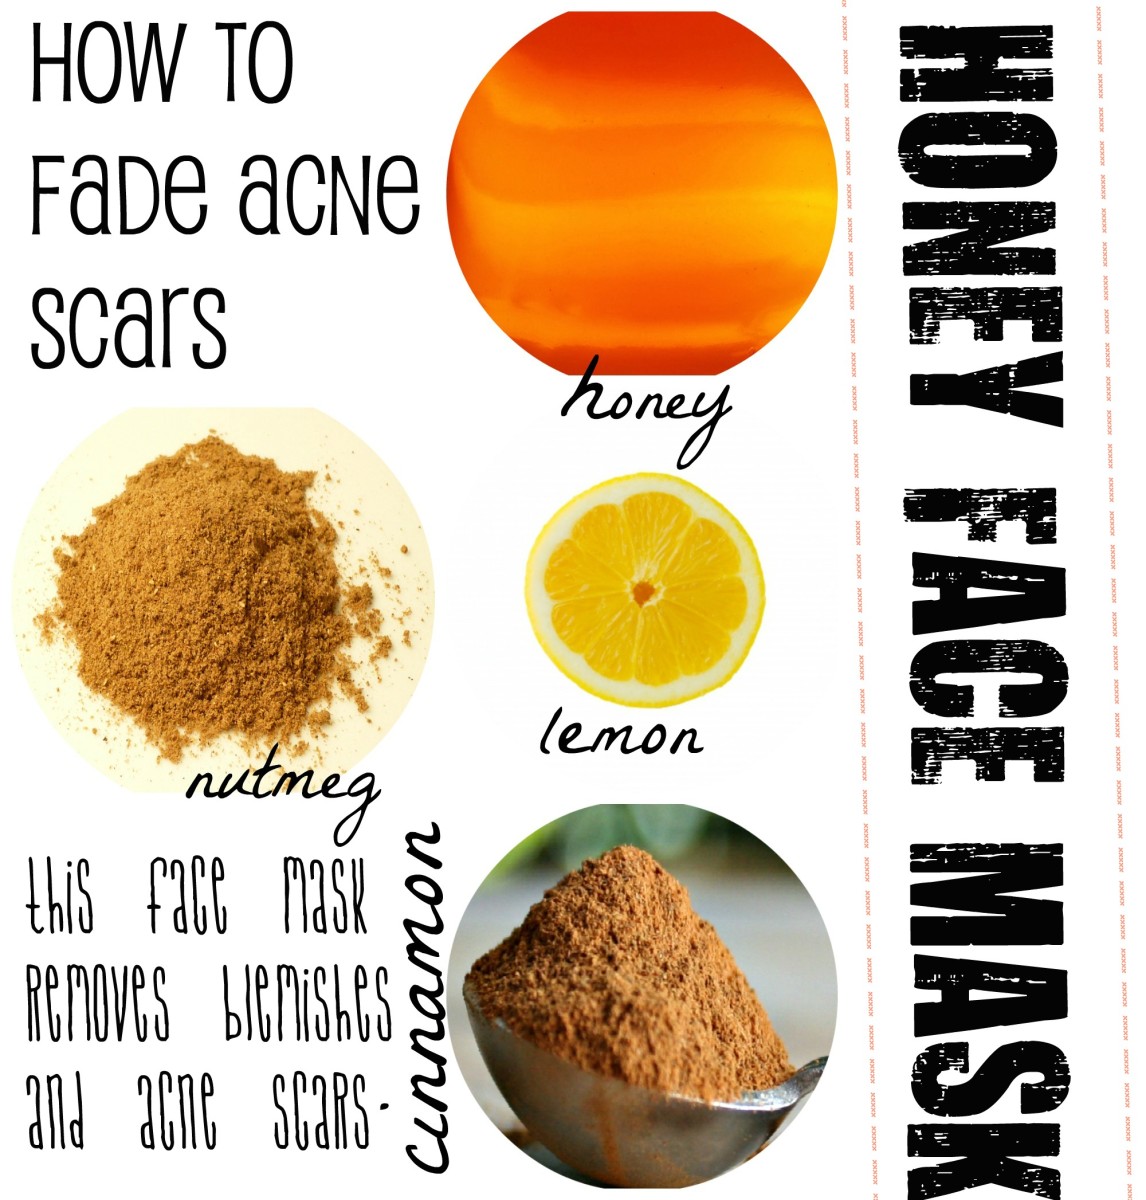 What does honey do for your skin?